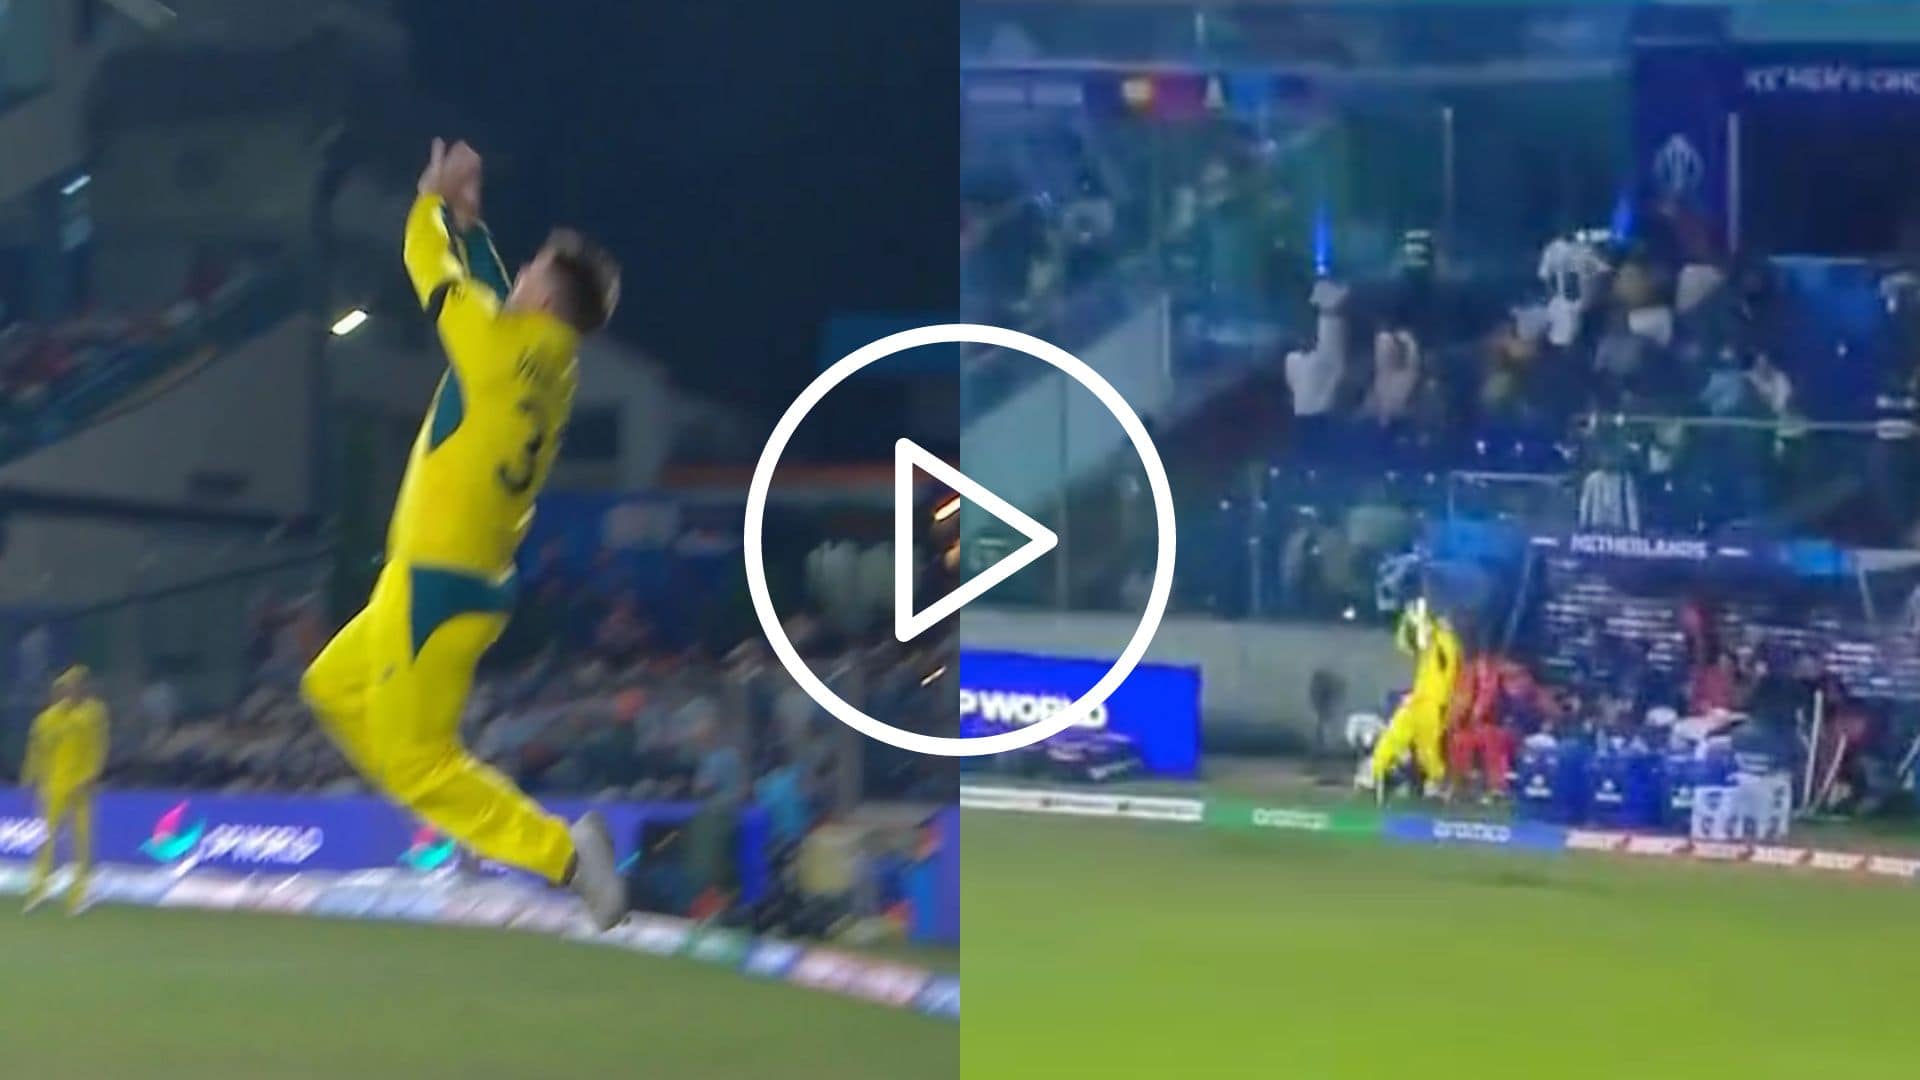 [Watch] David Warner’s Picture-Perfect Flying Catch Leaves Mitch Marsh & Australia Awed